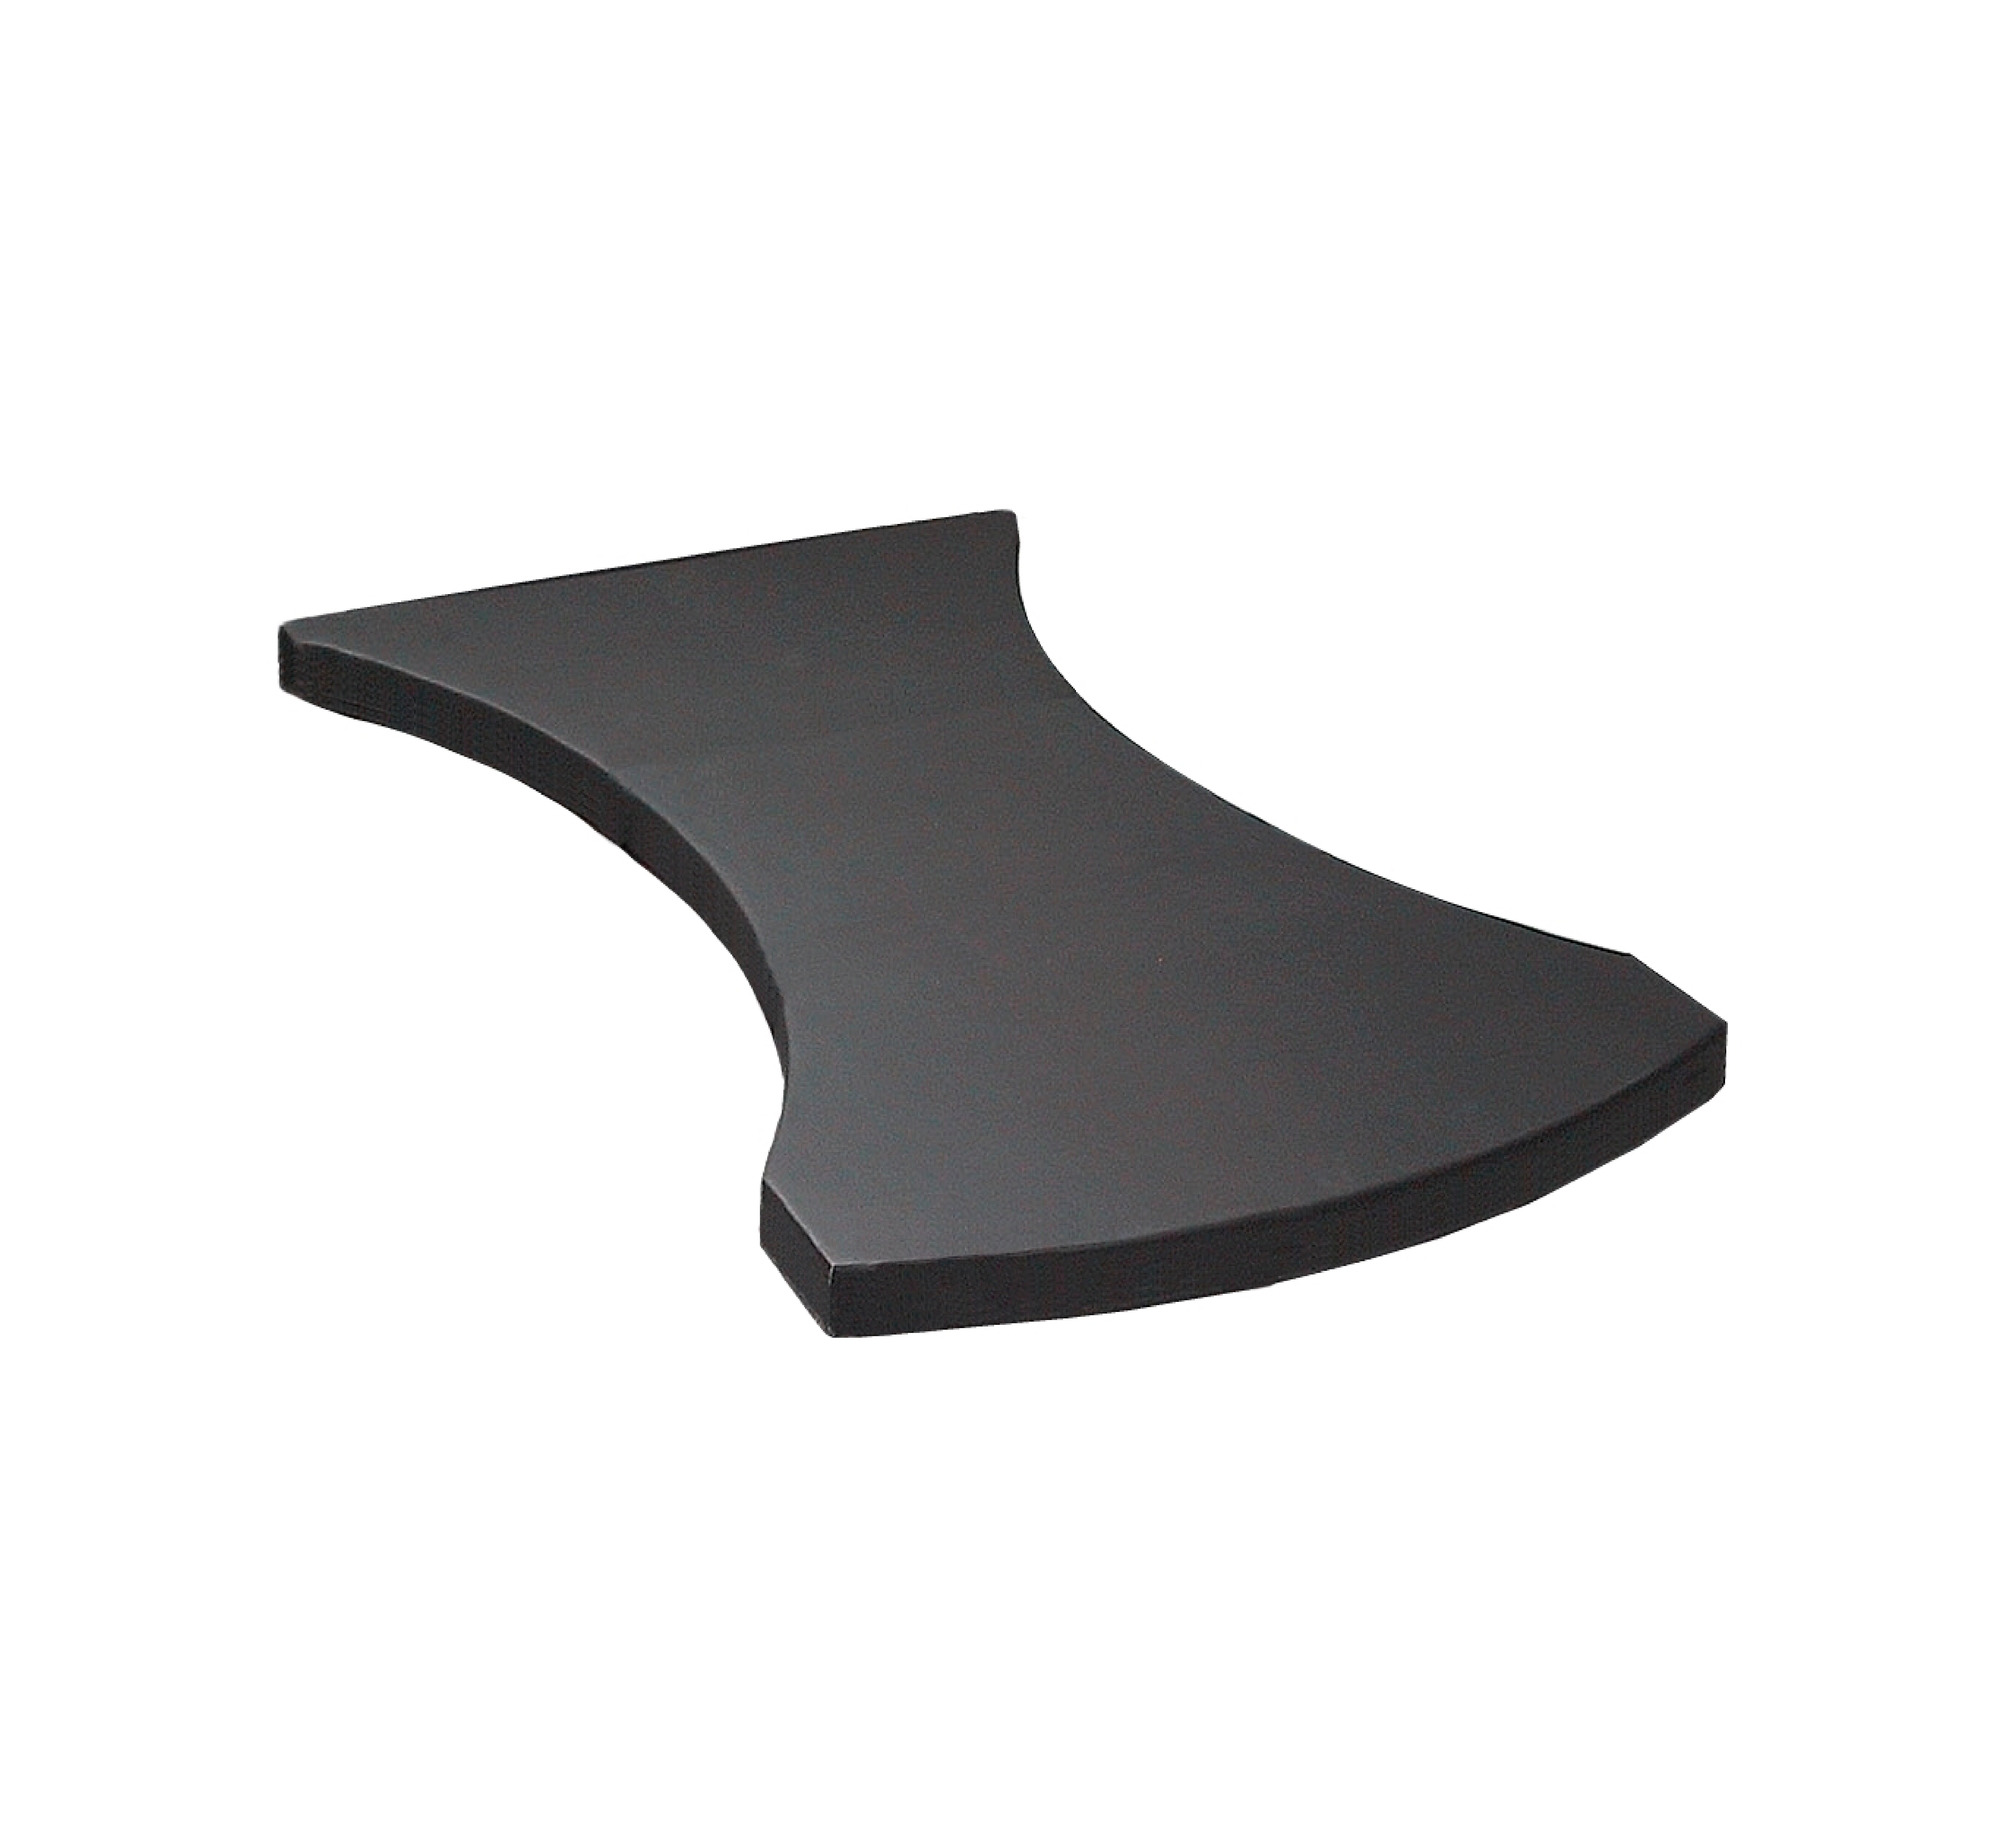 Contoured Carbon Fibre Arm and Hand Surgery Table Pad